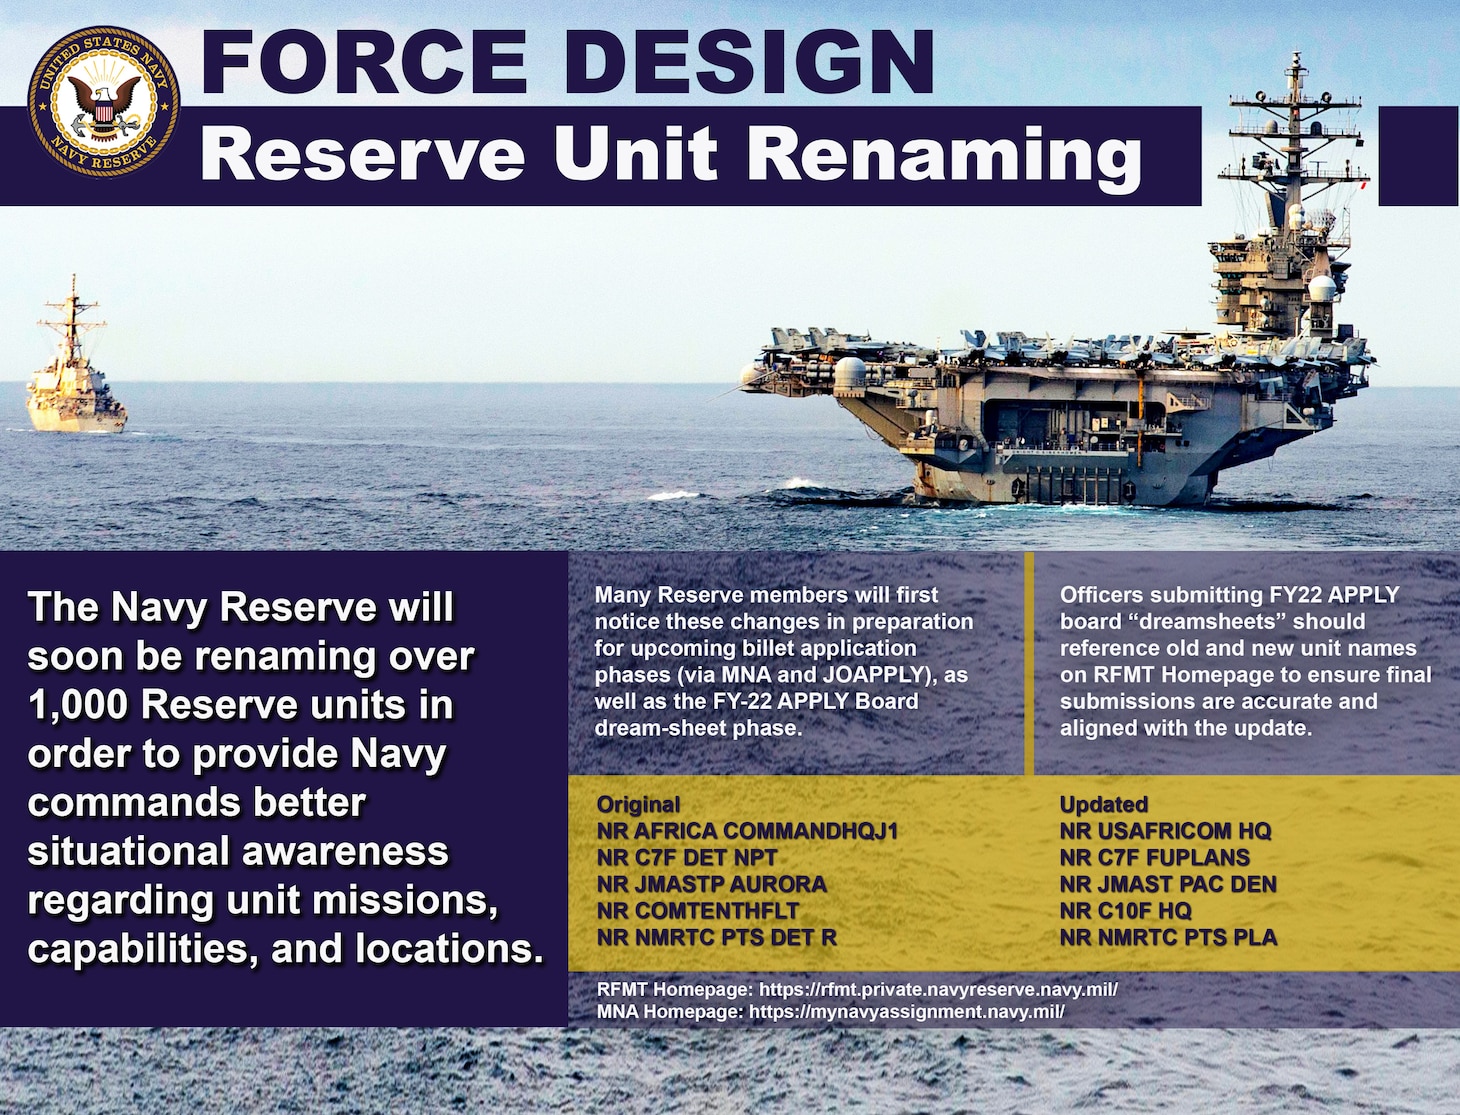 In support of the Navy Reserve Fighting Instructions, the Navy Reserve Force is in the process of updating over 1,000 Reserve unit titles using a standard naming convention. This will provide Active and Reserve commands with recognizable and consistent unit titles, ensuring better awareness regarding commands, missions/capabilities and associated locations.